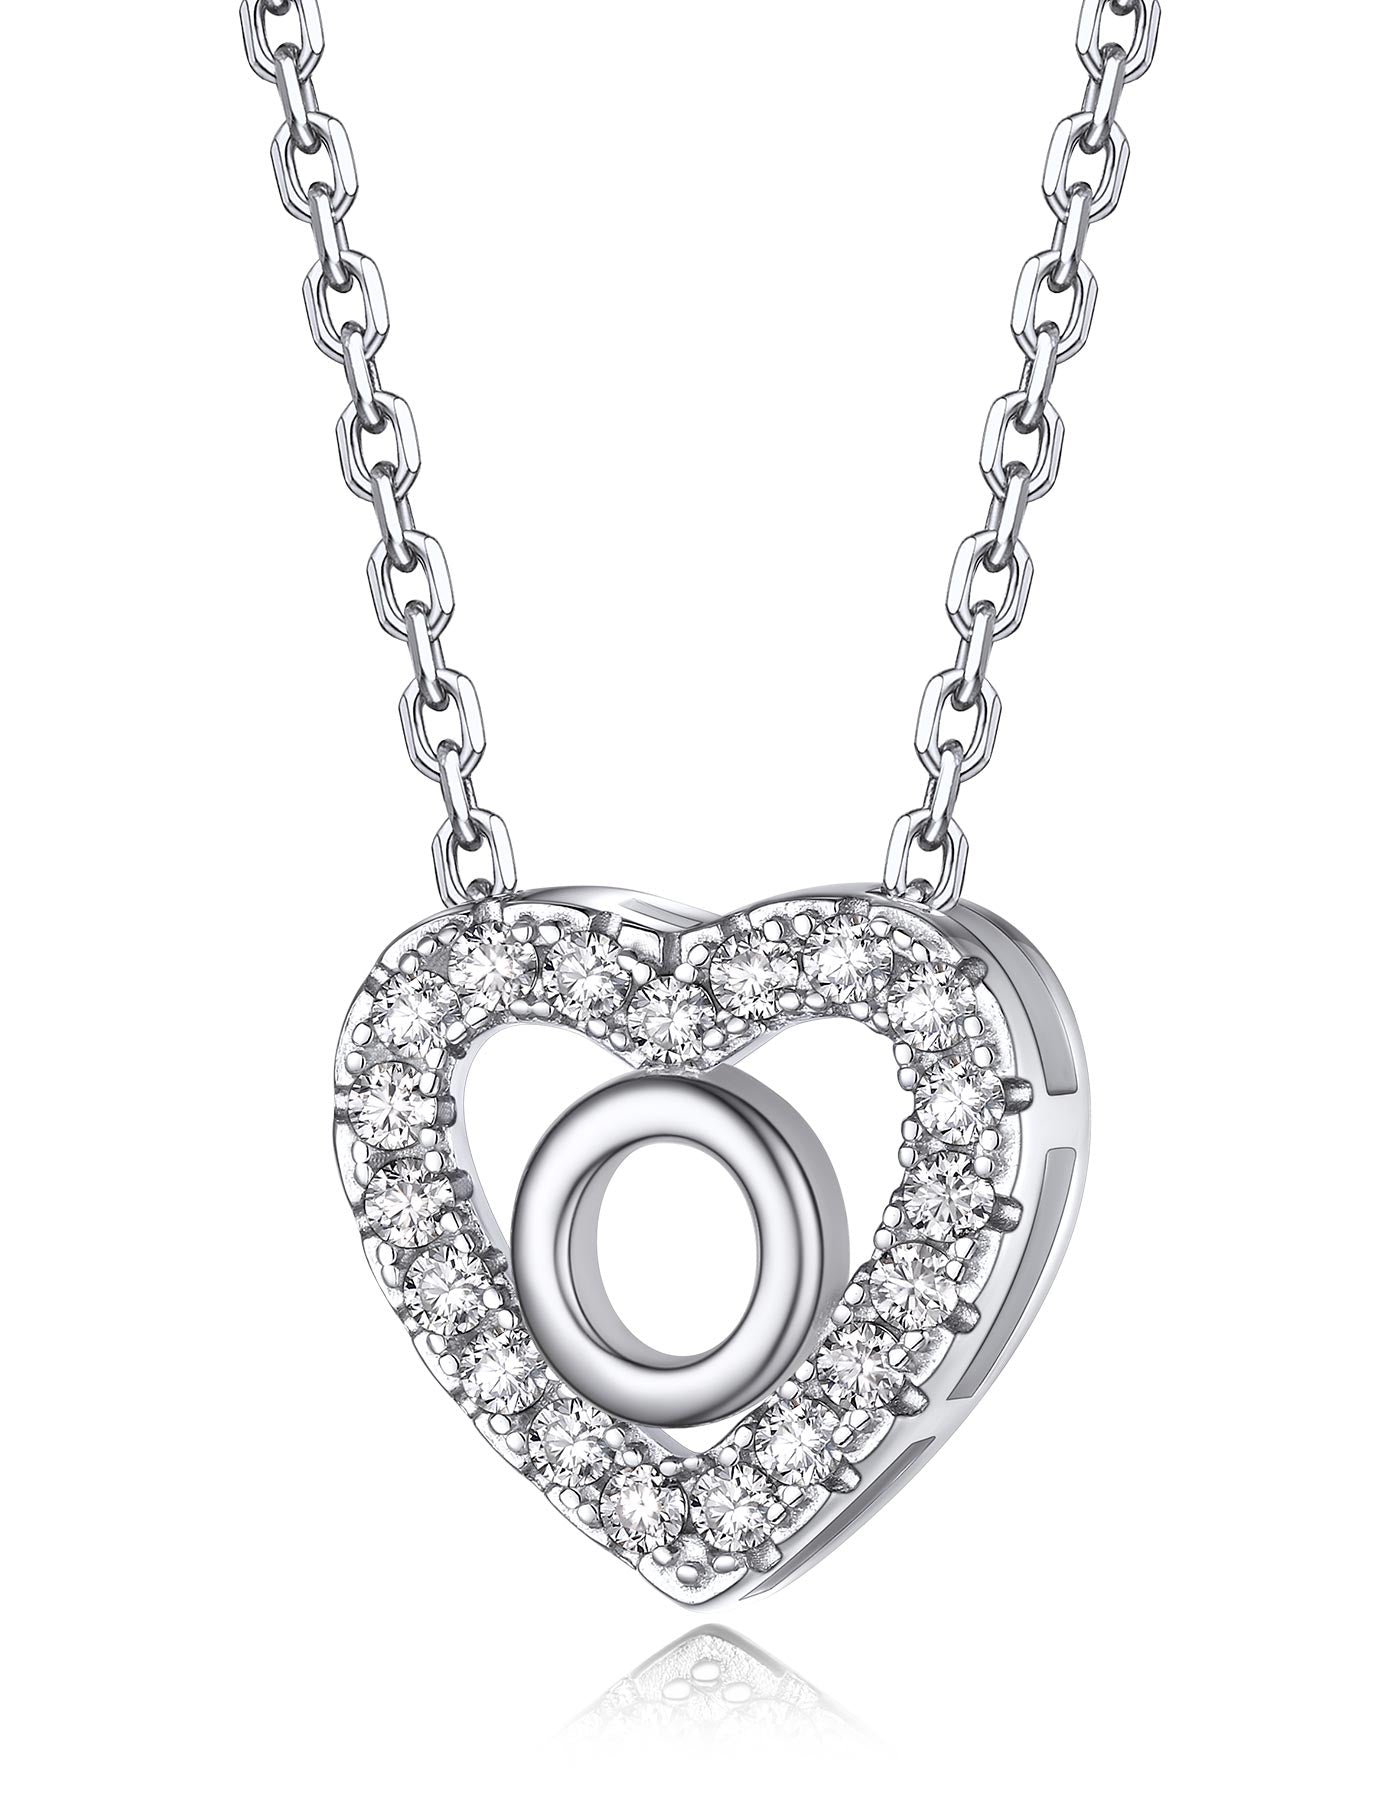 MomentWish Sterling Silver Heart Initial Necklace For Women